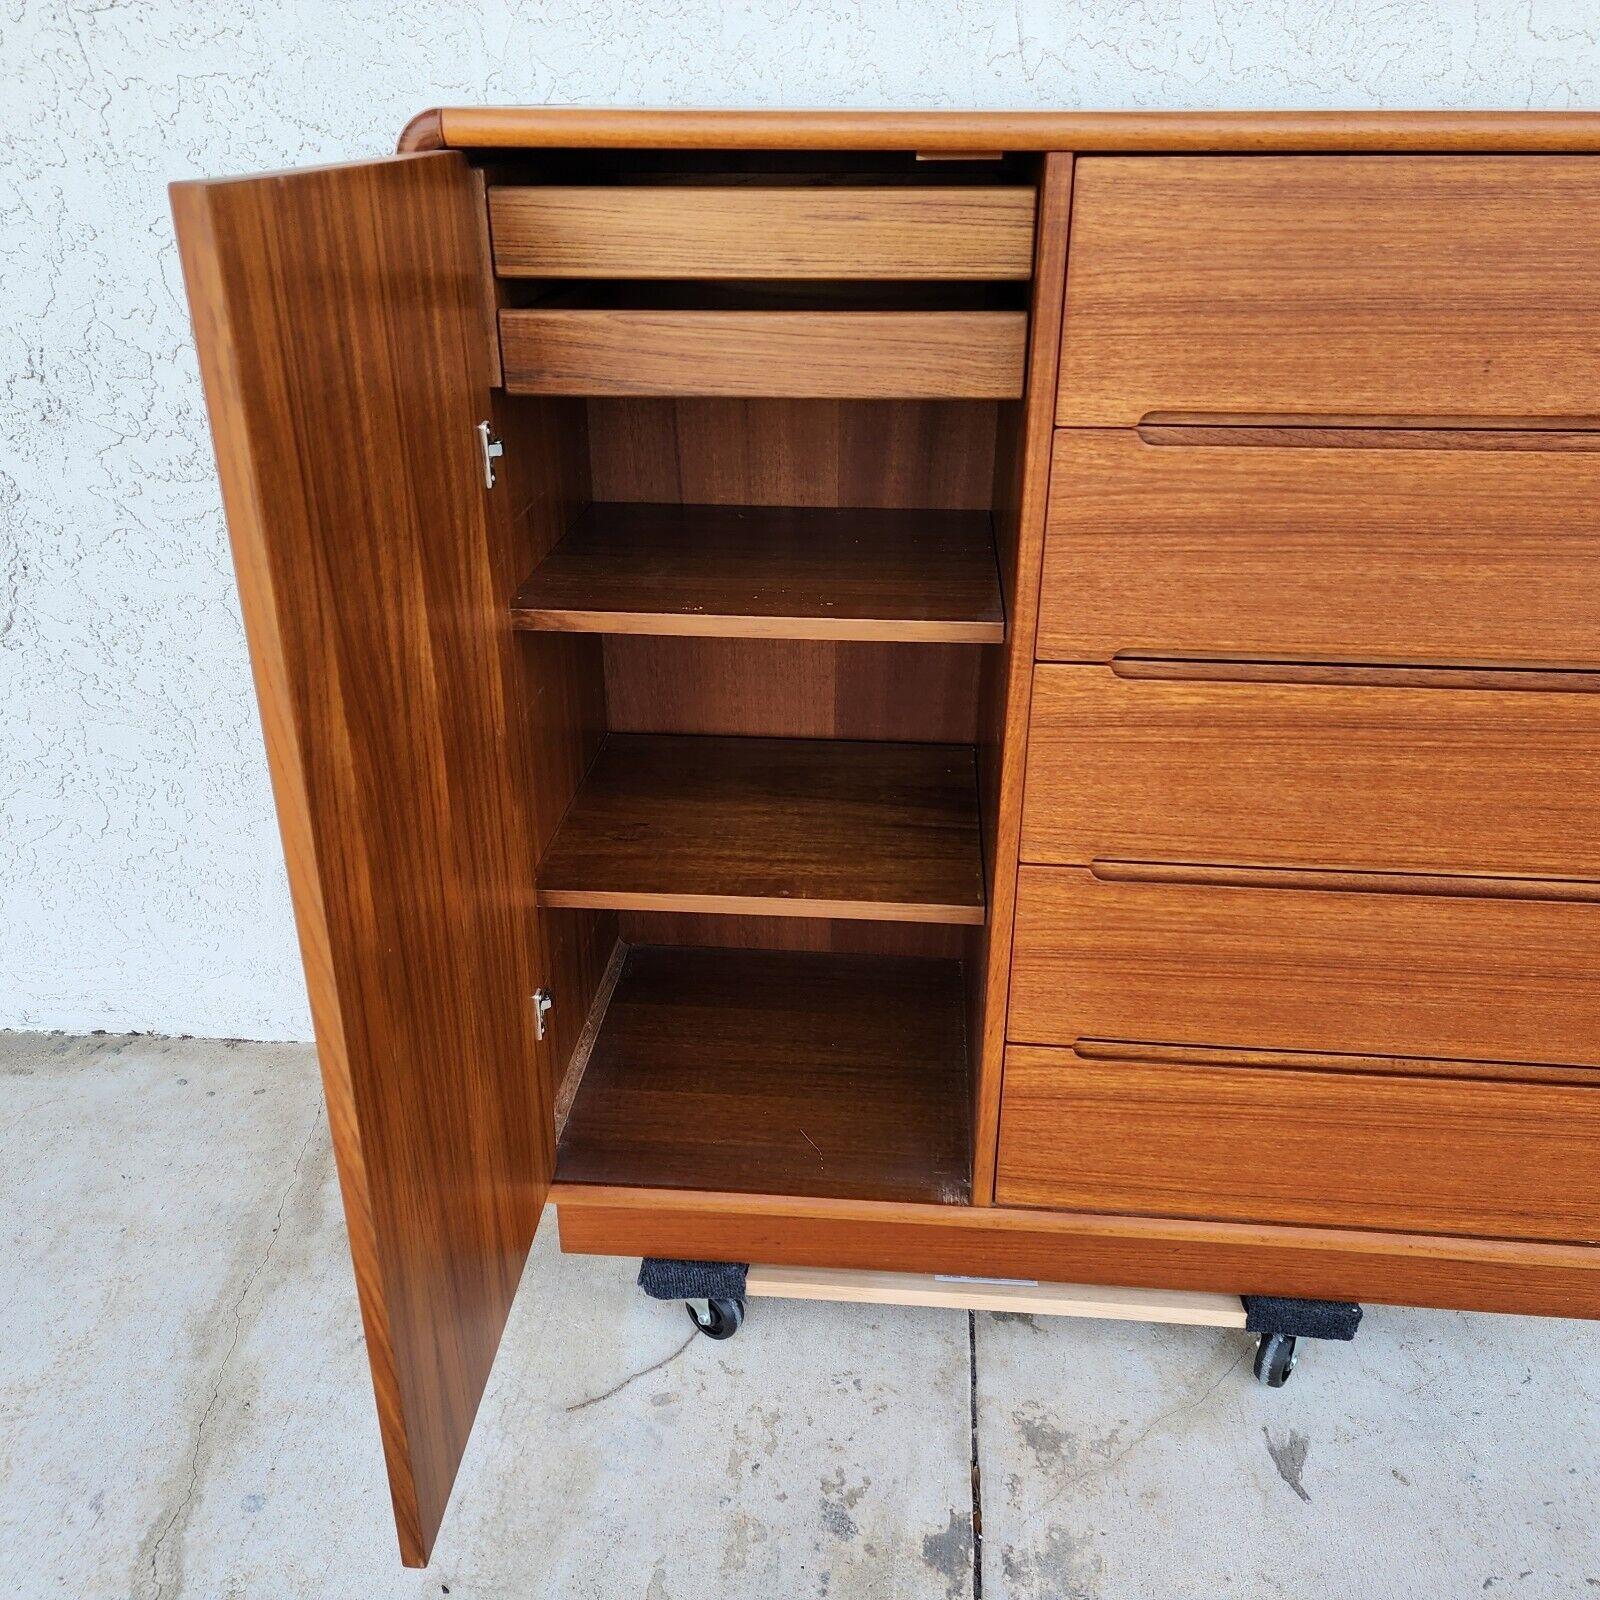 For FULL item description click on CONTINUE READING at the bottom of this page.

Offering One Of Our Recent Palm Beach Estate Fine Furniture Acquisitions Of A
MCM Teak Highboy Dresser Gentleman's Chest by Sun Cabinet Co
Drawers are clean, work